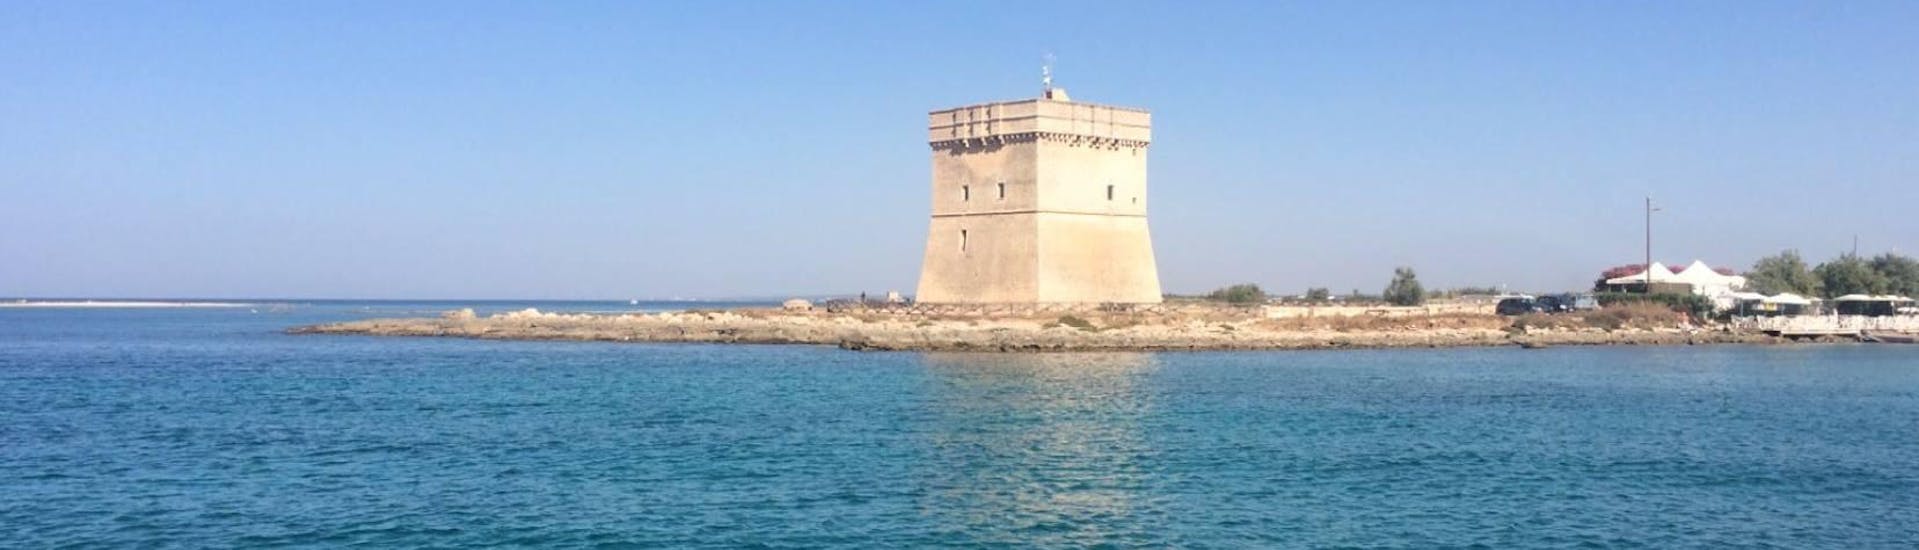 The mighty tower of Torre Chiana can be admired during our catamaran boat trip from Porto Cesareo.